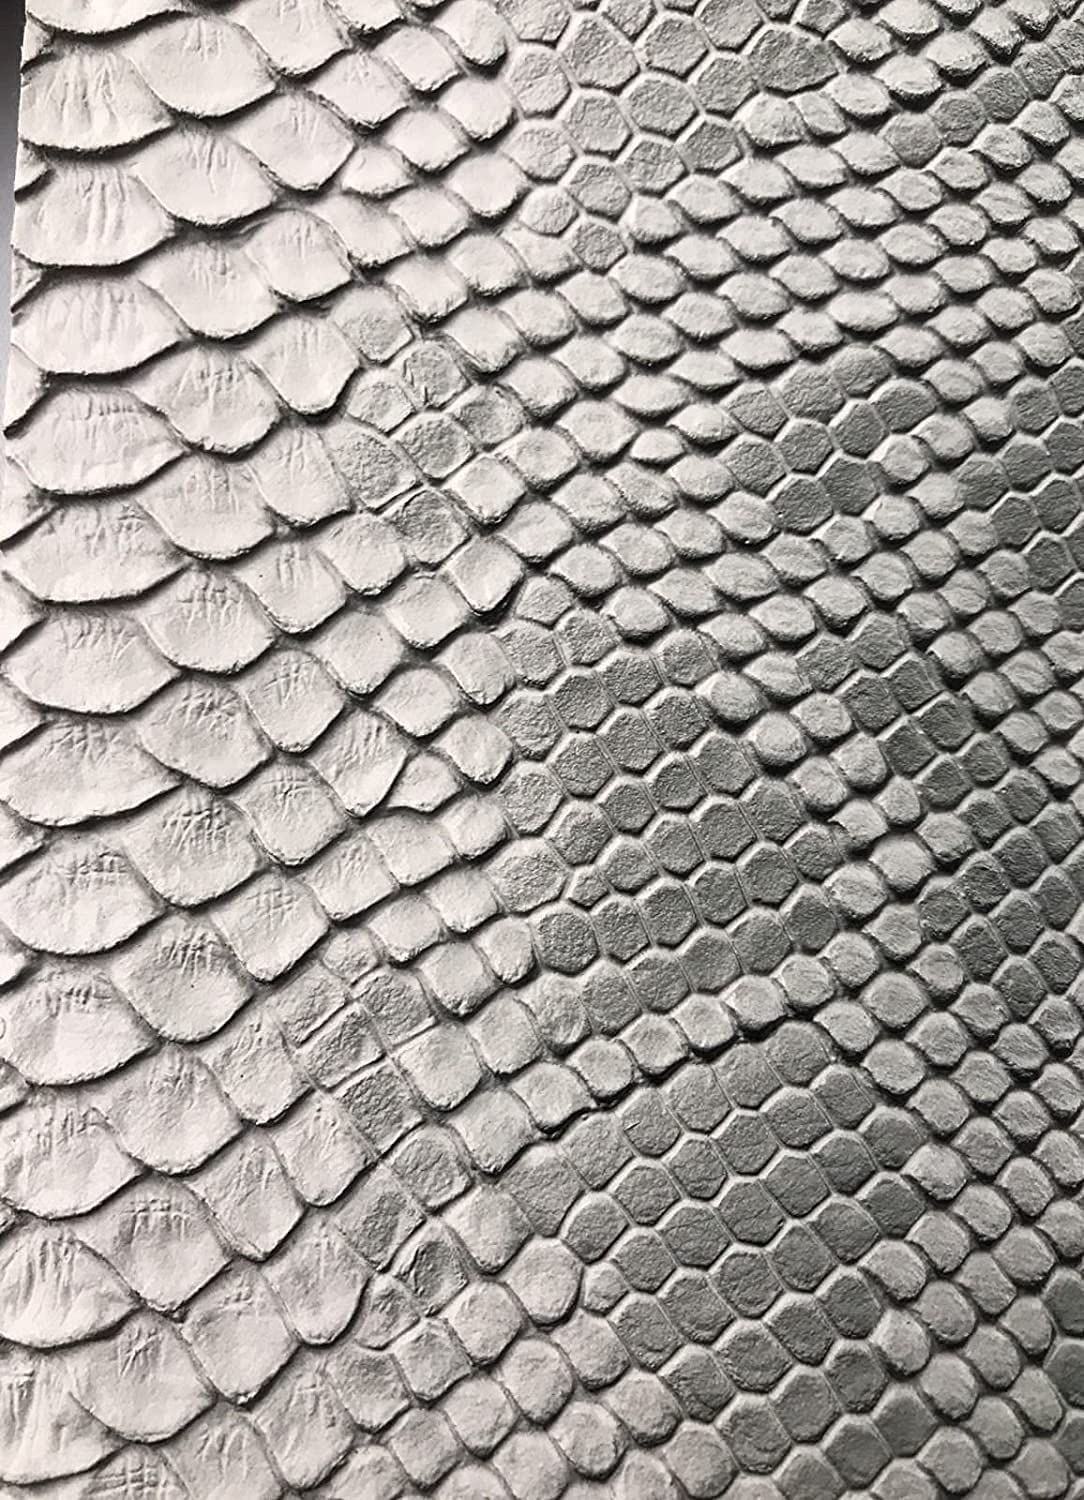 53/54" Wide Snake Fake Leather Upholstery, 3-D Viper Snake Skin Texture Faux Leather PVC Vinyl Fabric by The Yard. (1 Yard, Silver/Grey)